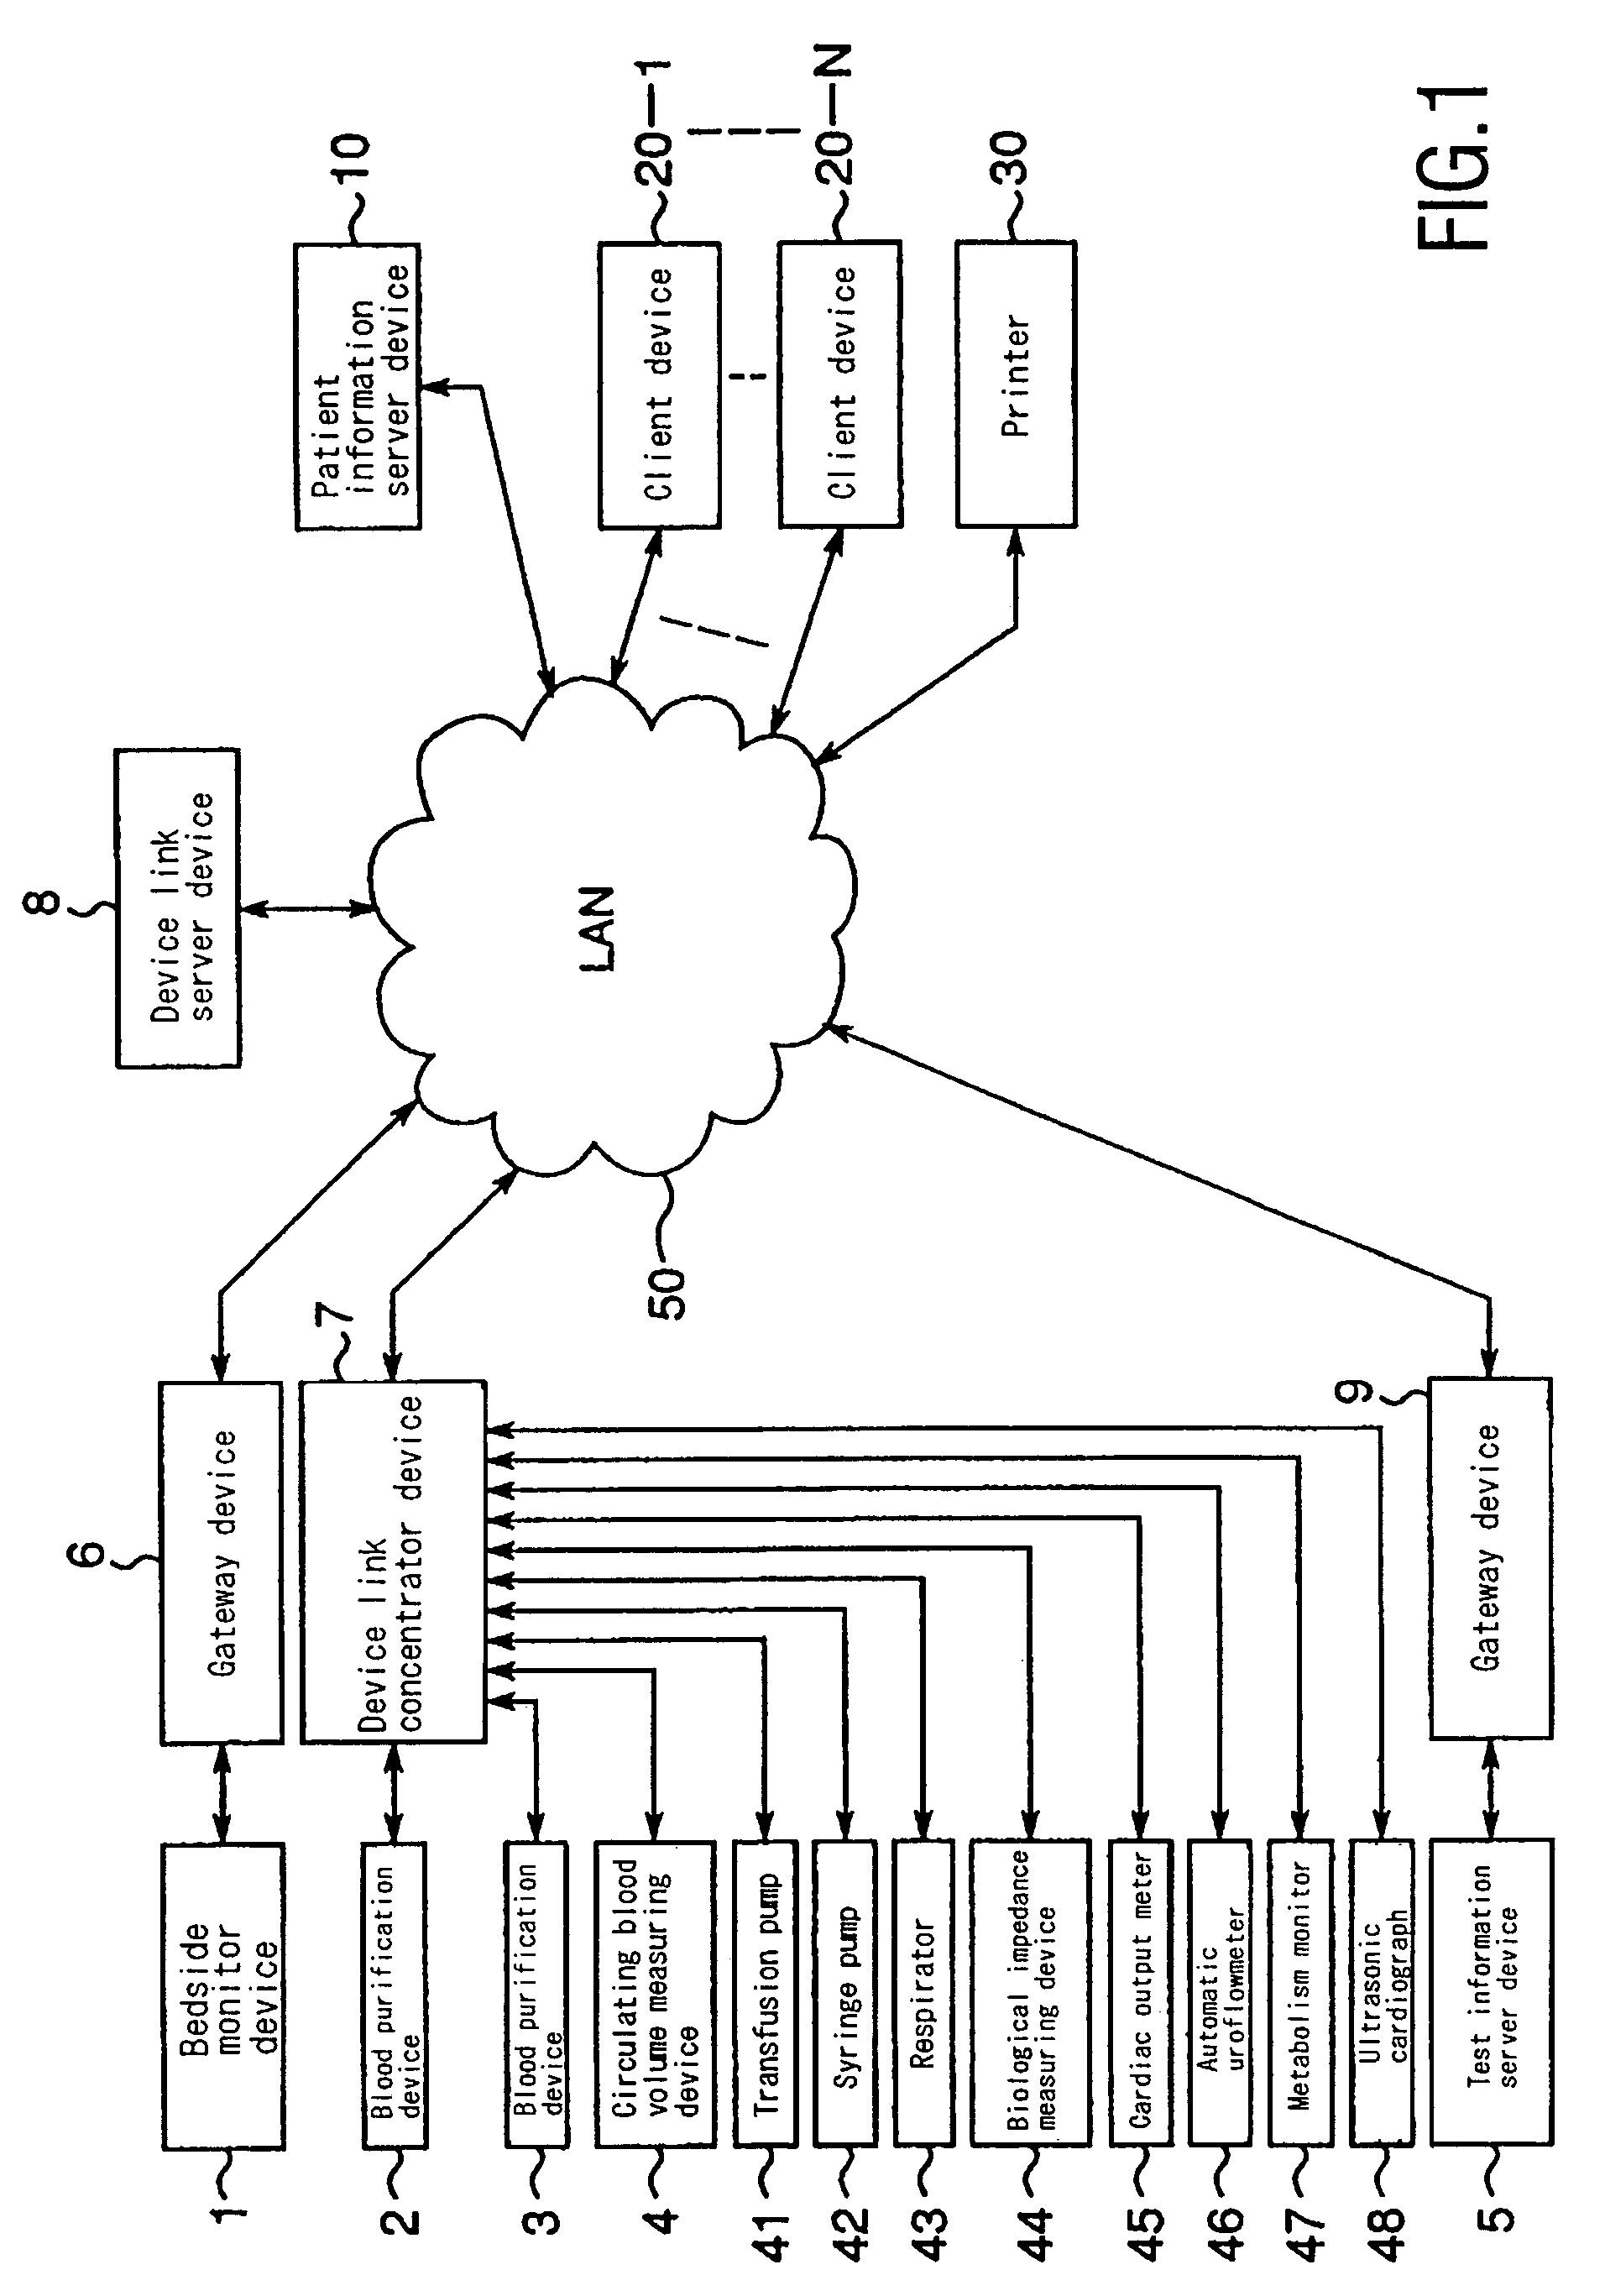 Biological information and blood treating device information control system, biological information and blood treating device information control device, and biological information and blood treating device information control method